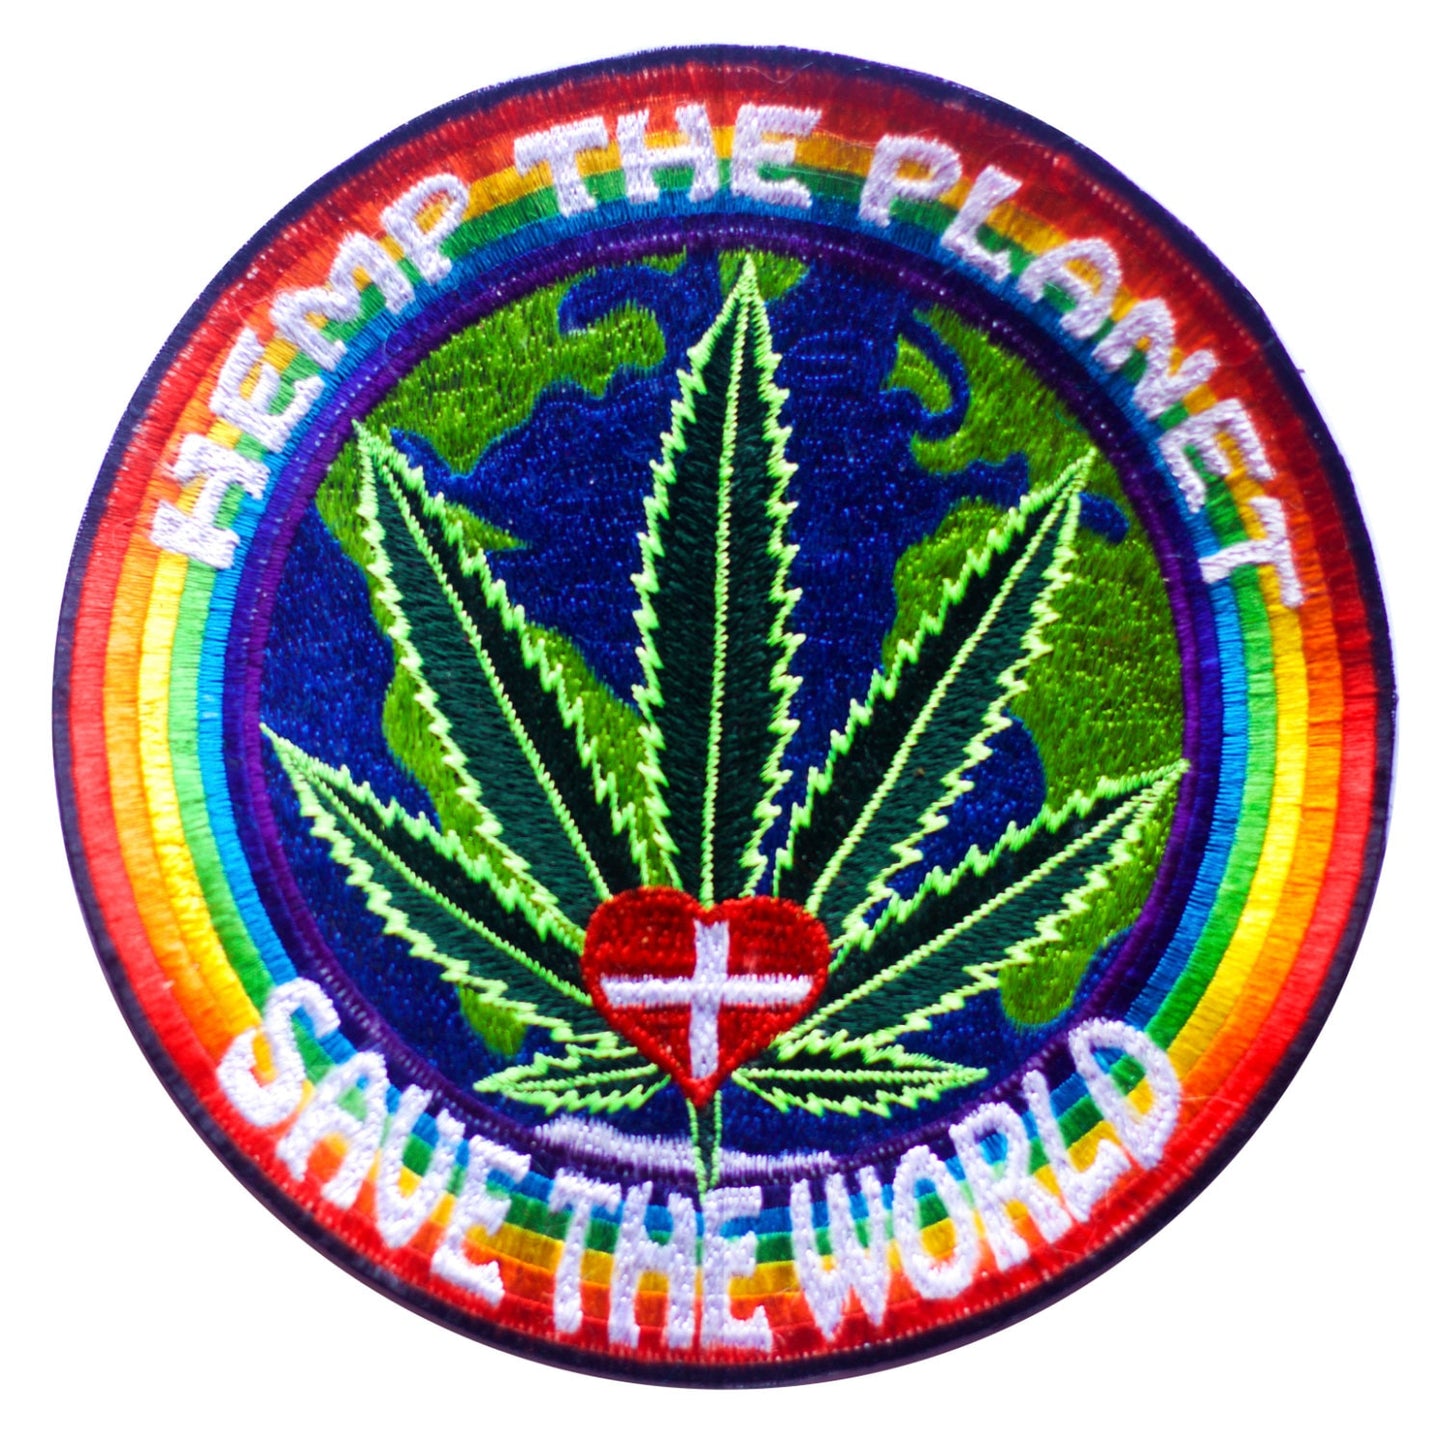 Hemp the planet - save the world patch 7.5 inch THC healing Medical Marihuana Cannabis embroidery  build houses, make fuel and clothing